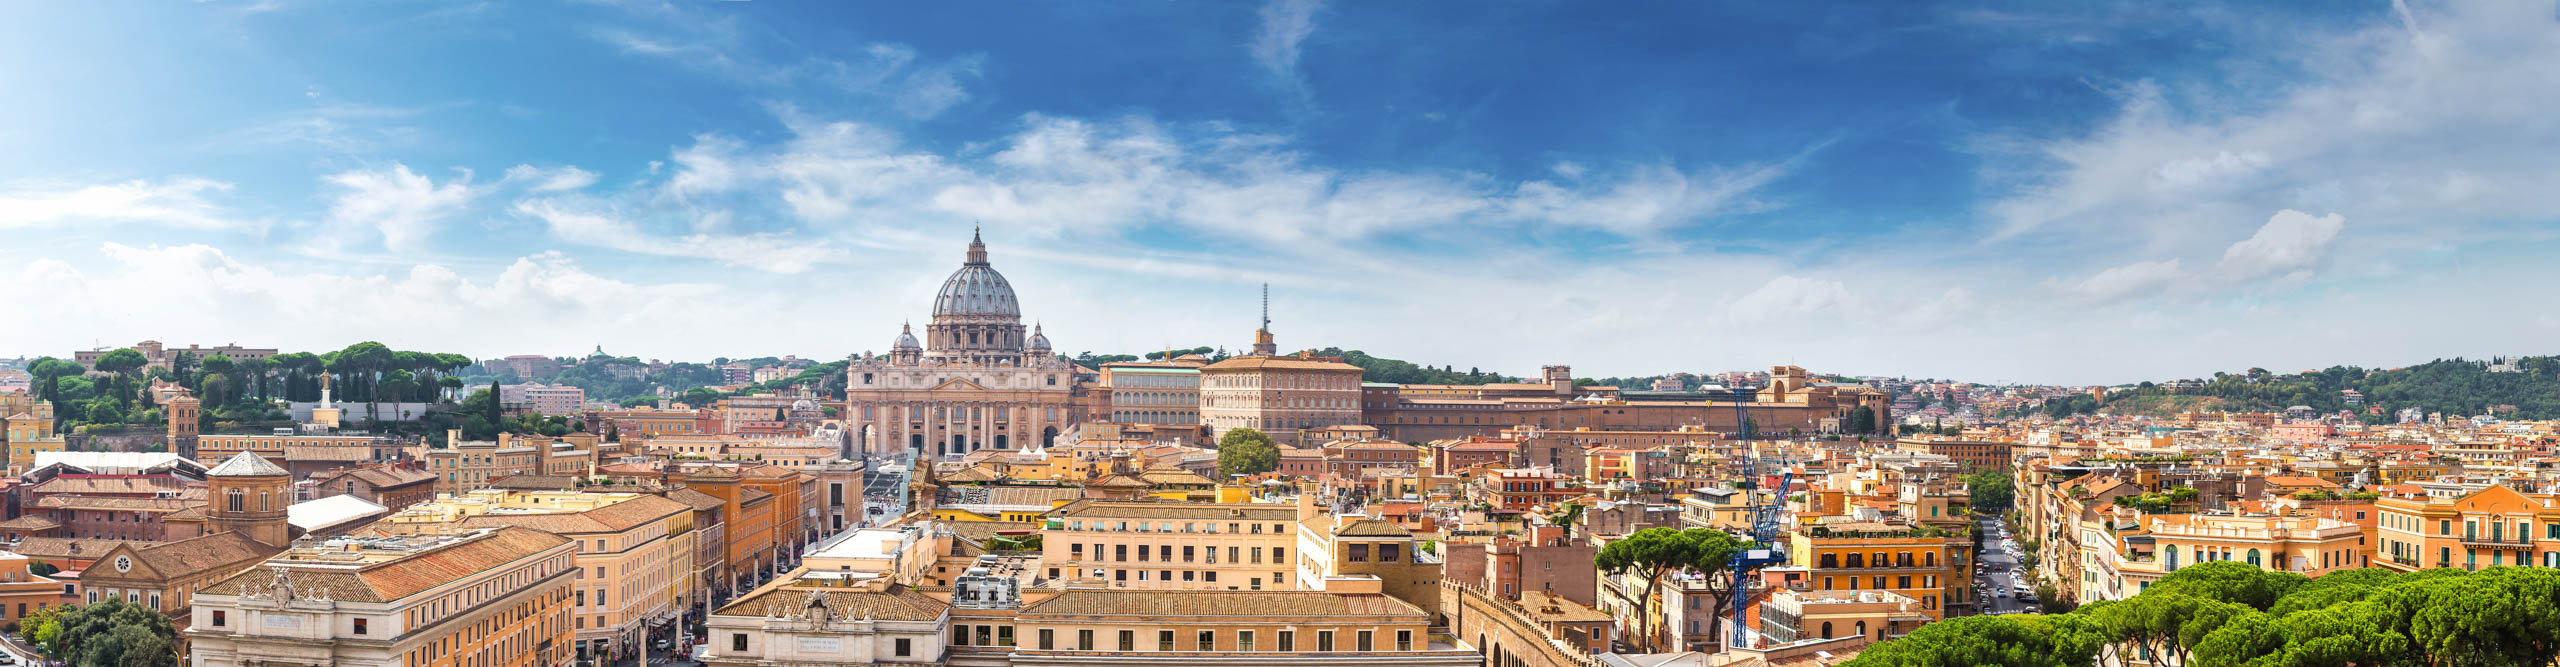 Panorama of Rome and Basilica of St. Peter in a summer day in Vatican, with a bright blue sky